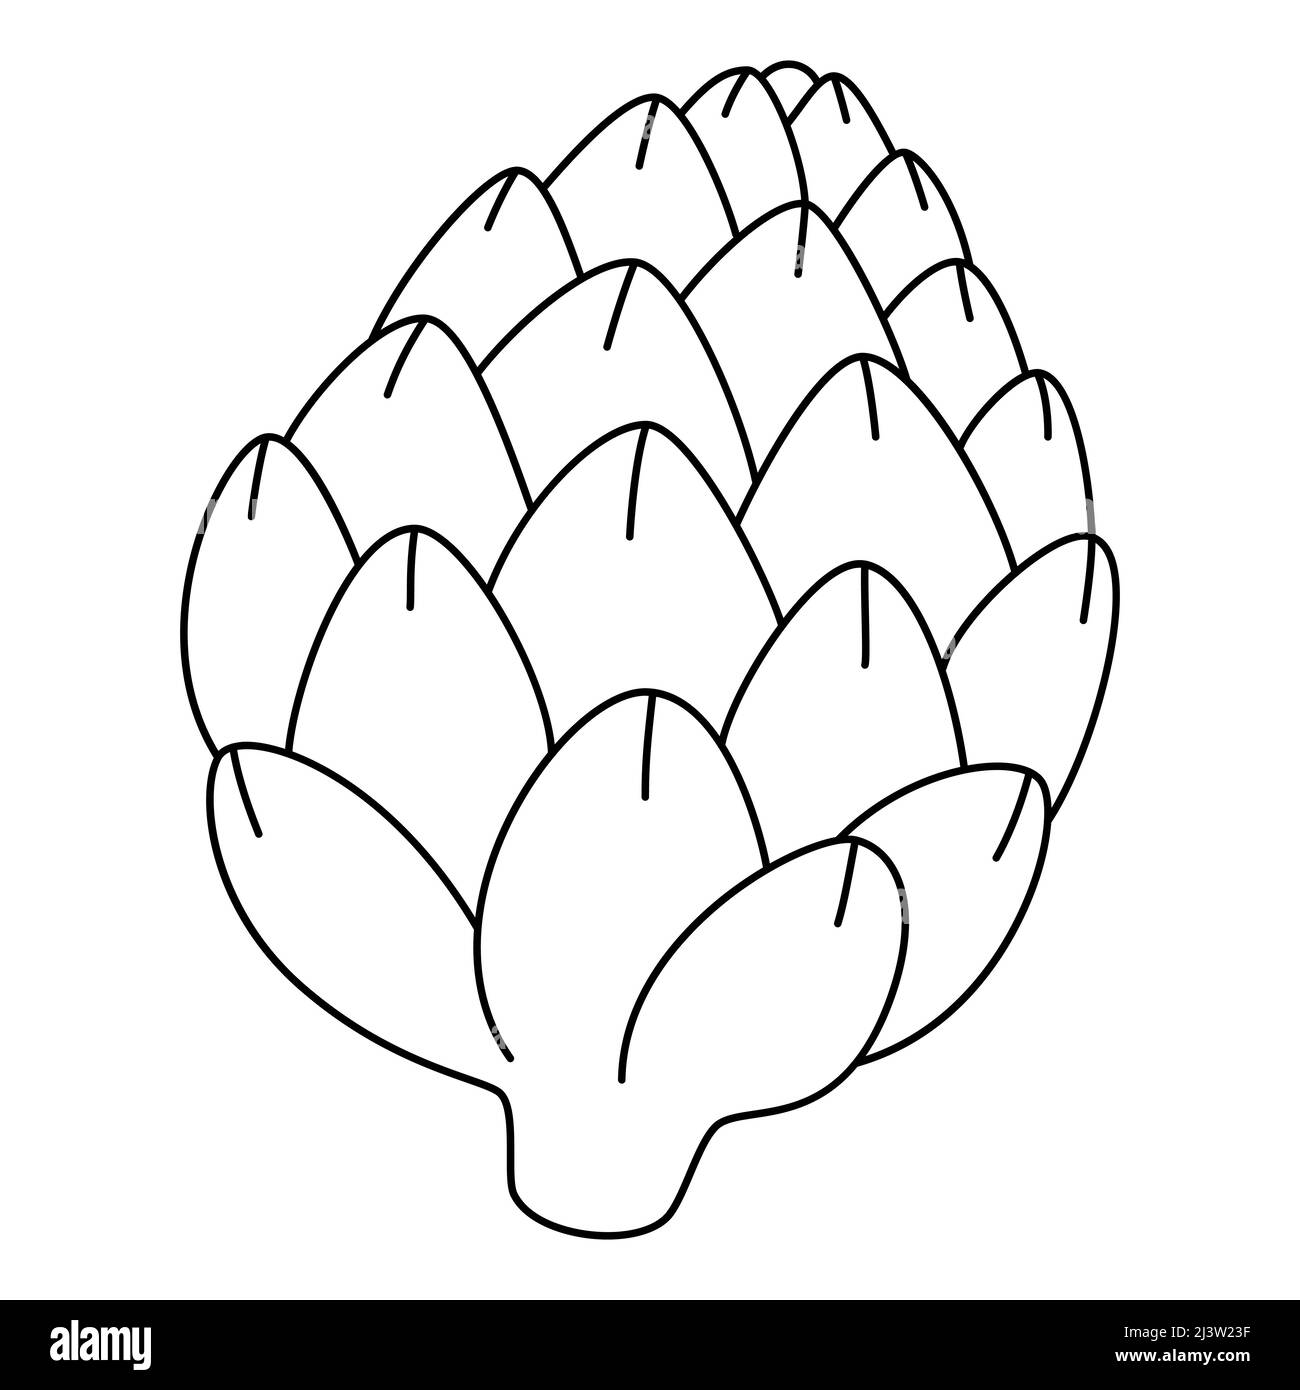 Cartoon flower bud of artichoke. Black and white vector illustration of vegetable for coloring book Stock Vector